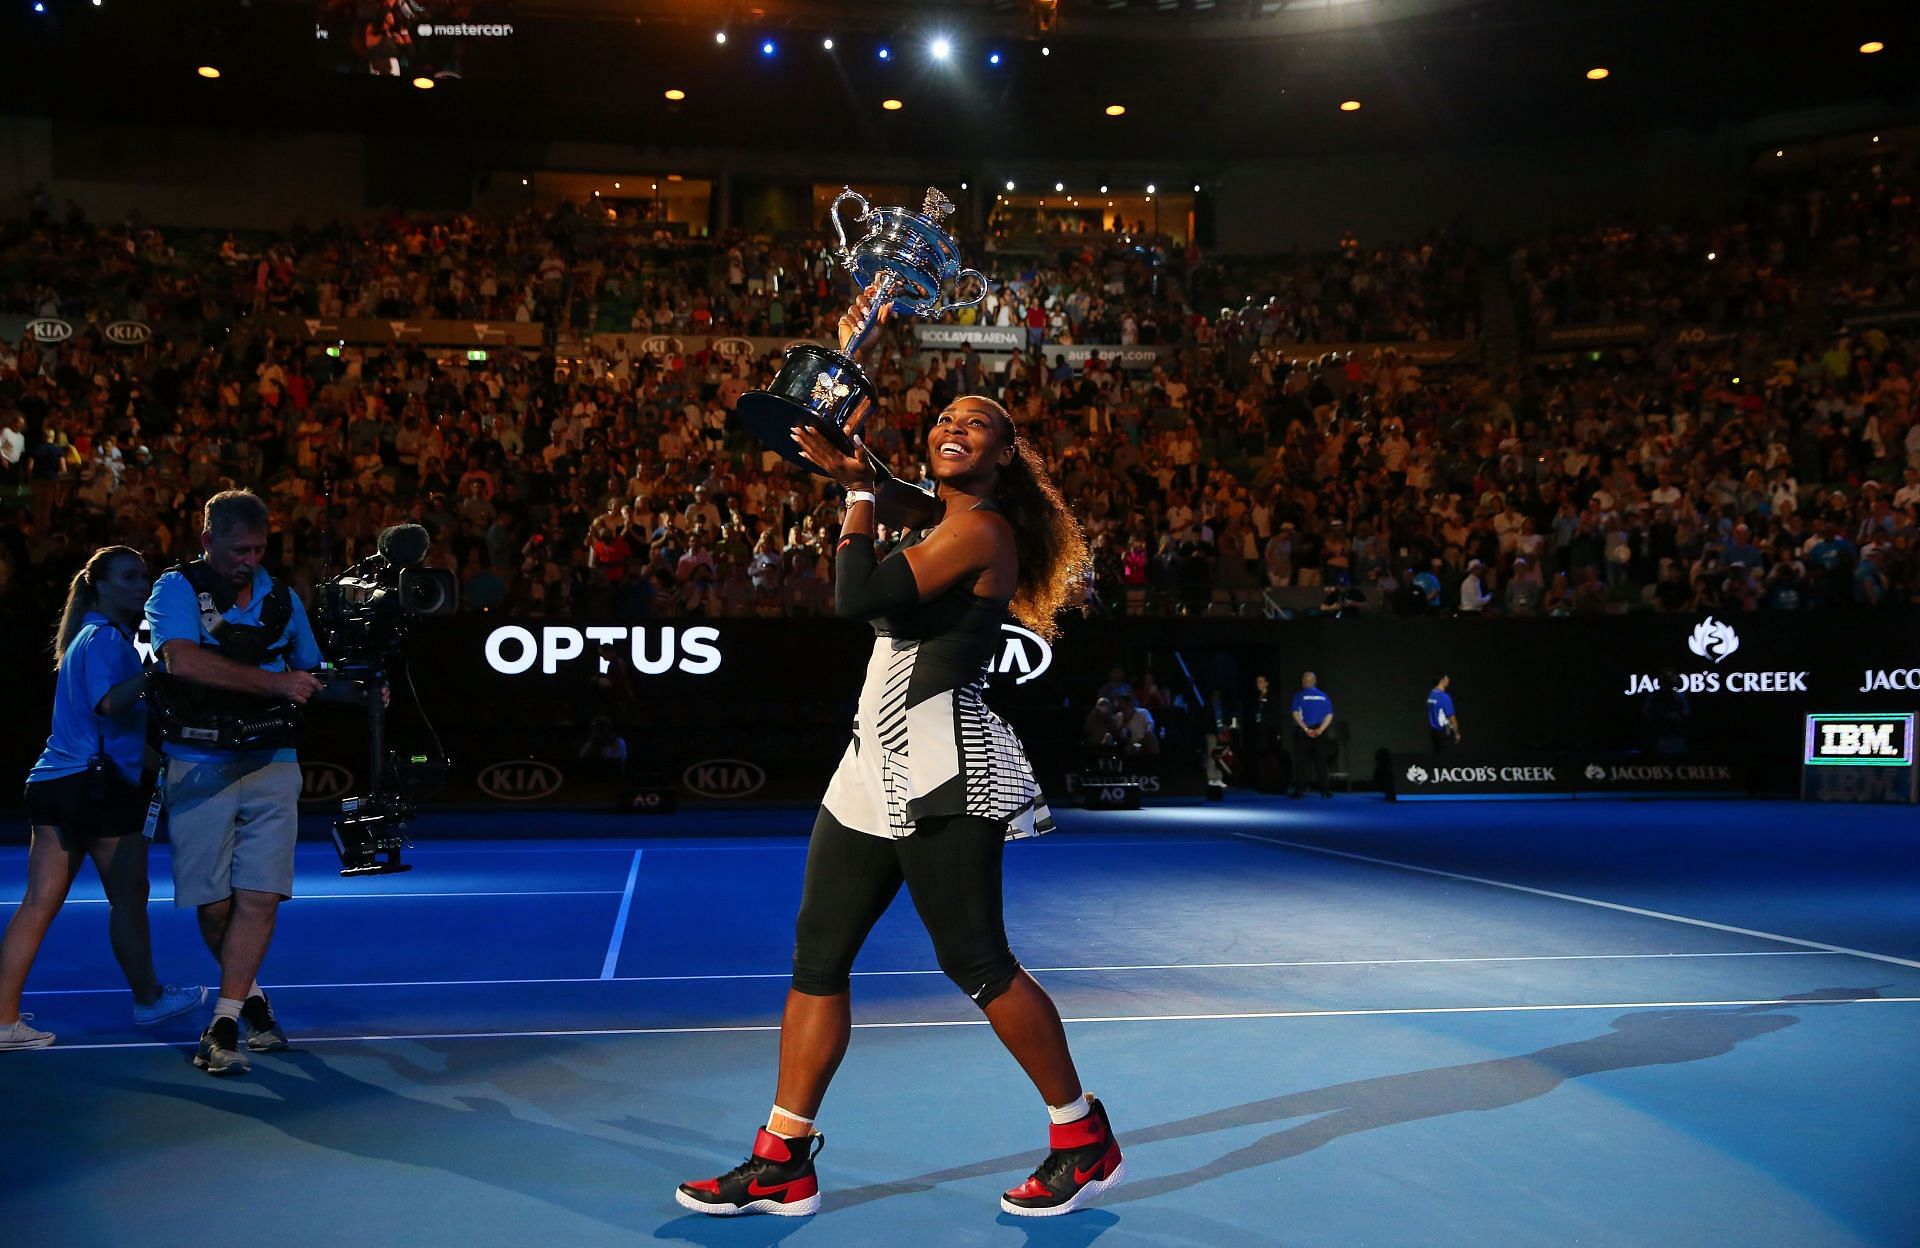 Serena Williams won her 23rd Grand Slam title at the 2017 Australian Open